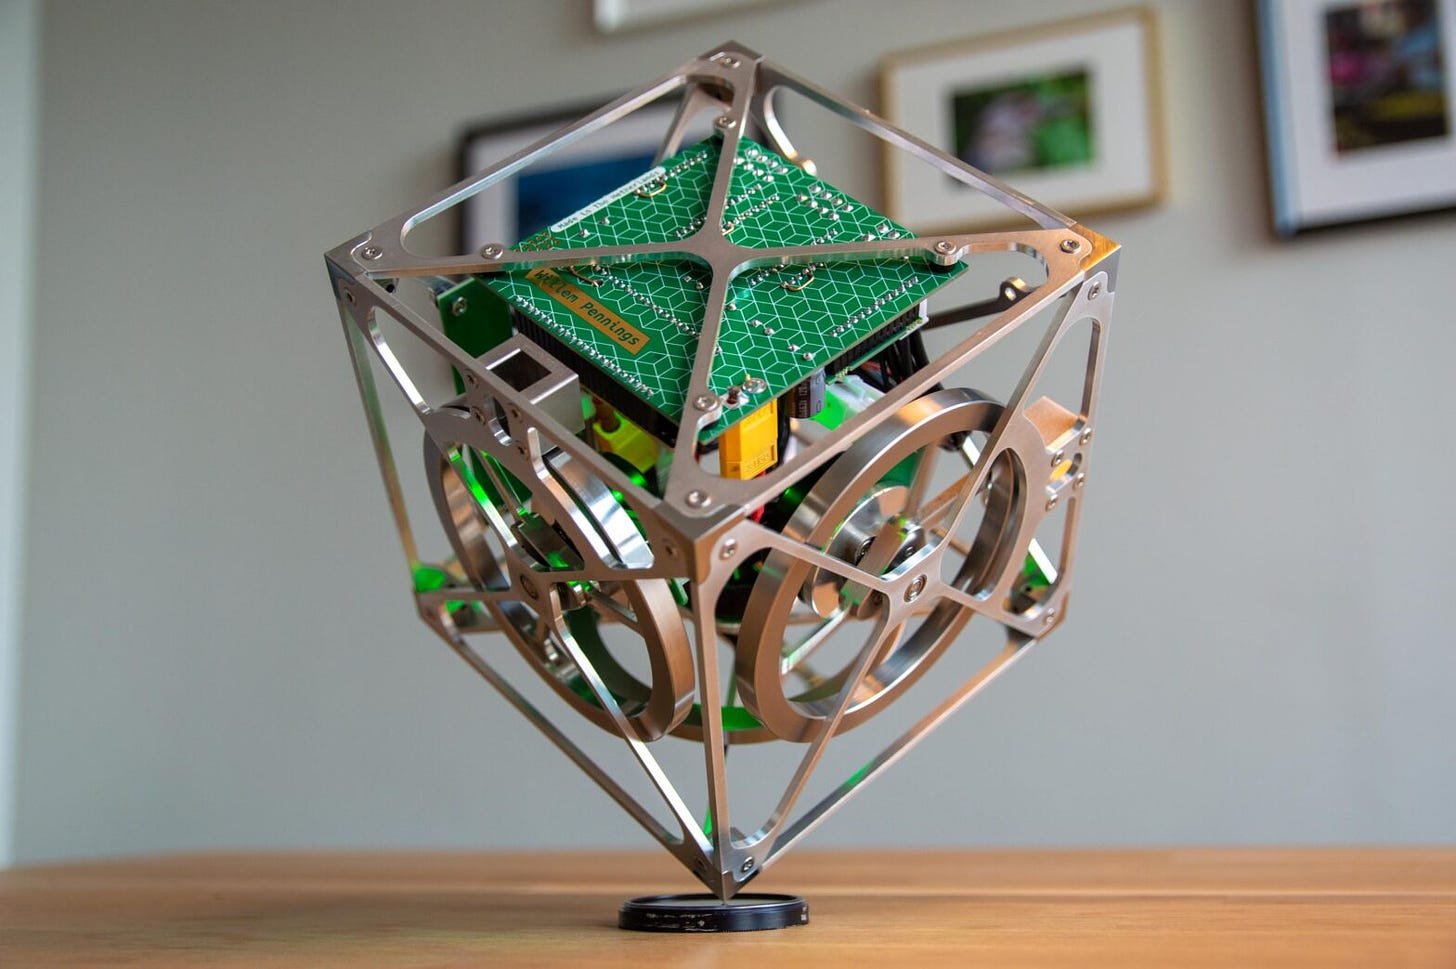 This cube can balance on its corner using three orthogonally mounted reaction wheels